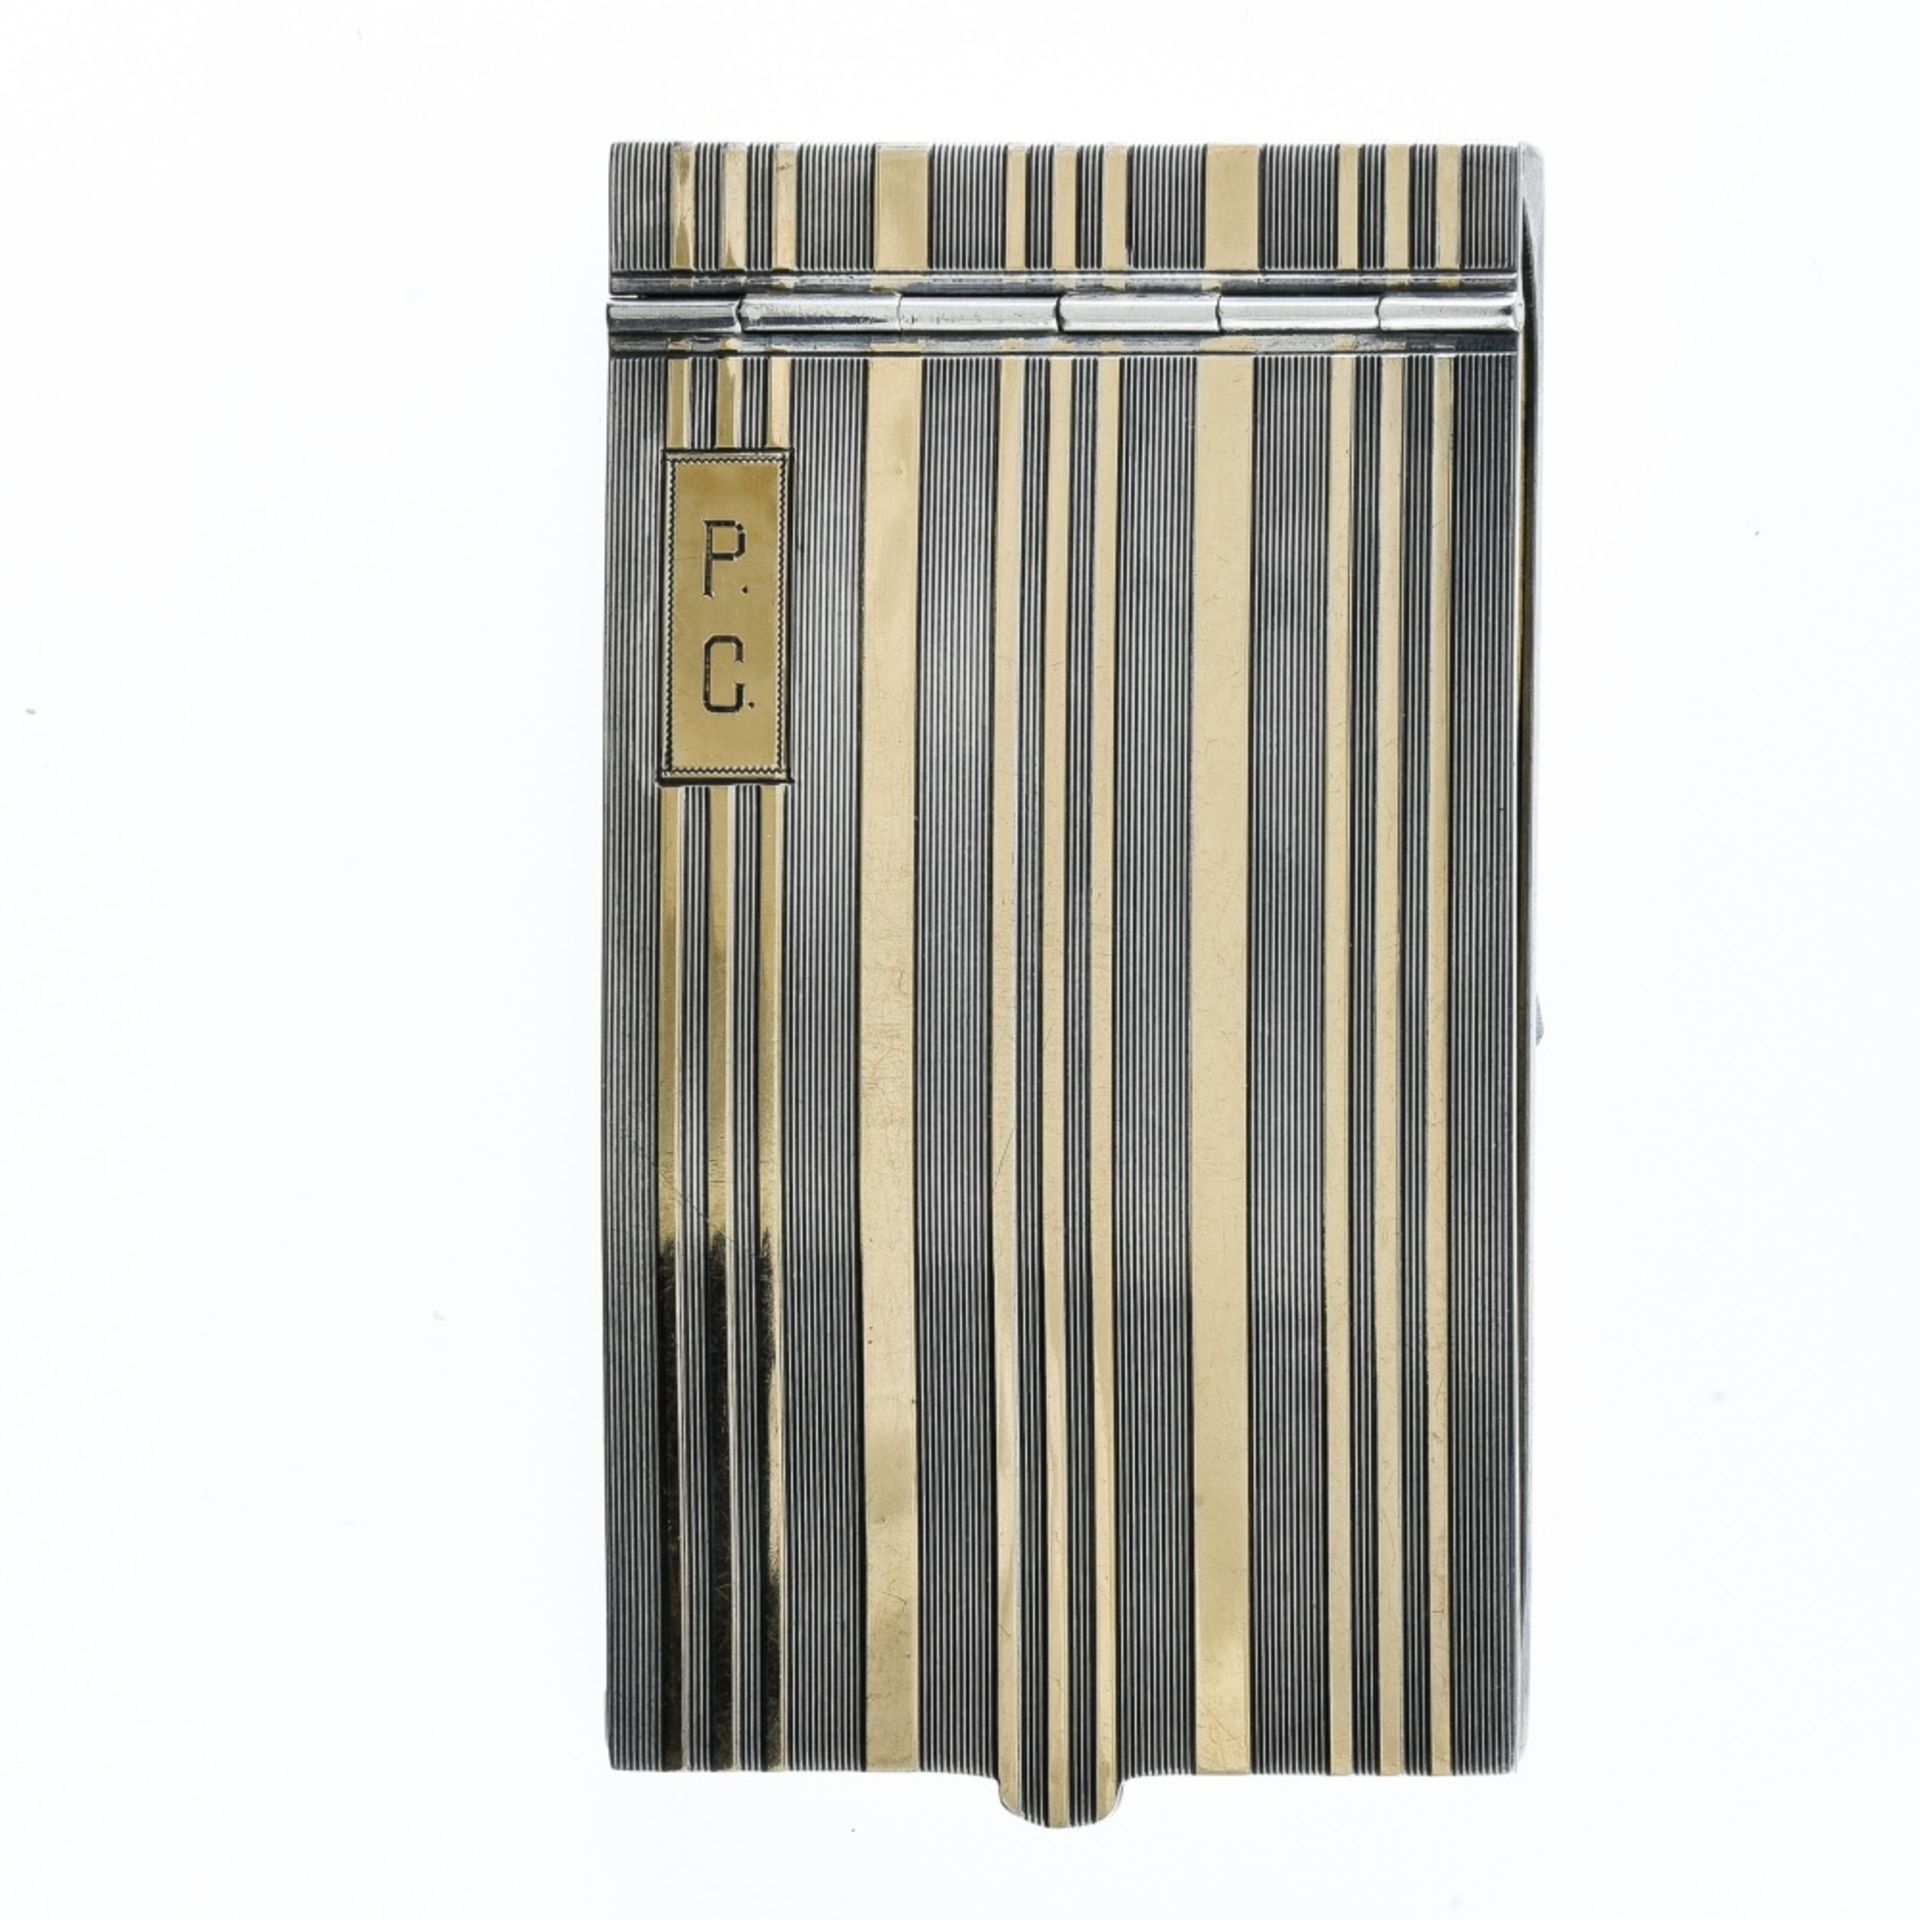 Art Deco dance card Silver and 14 kt yellow gold. The casing is striped with smooth gold lines.